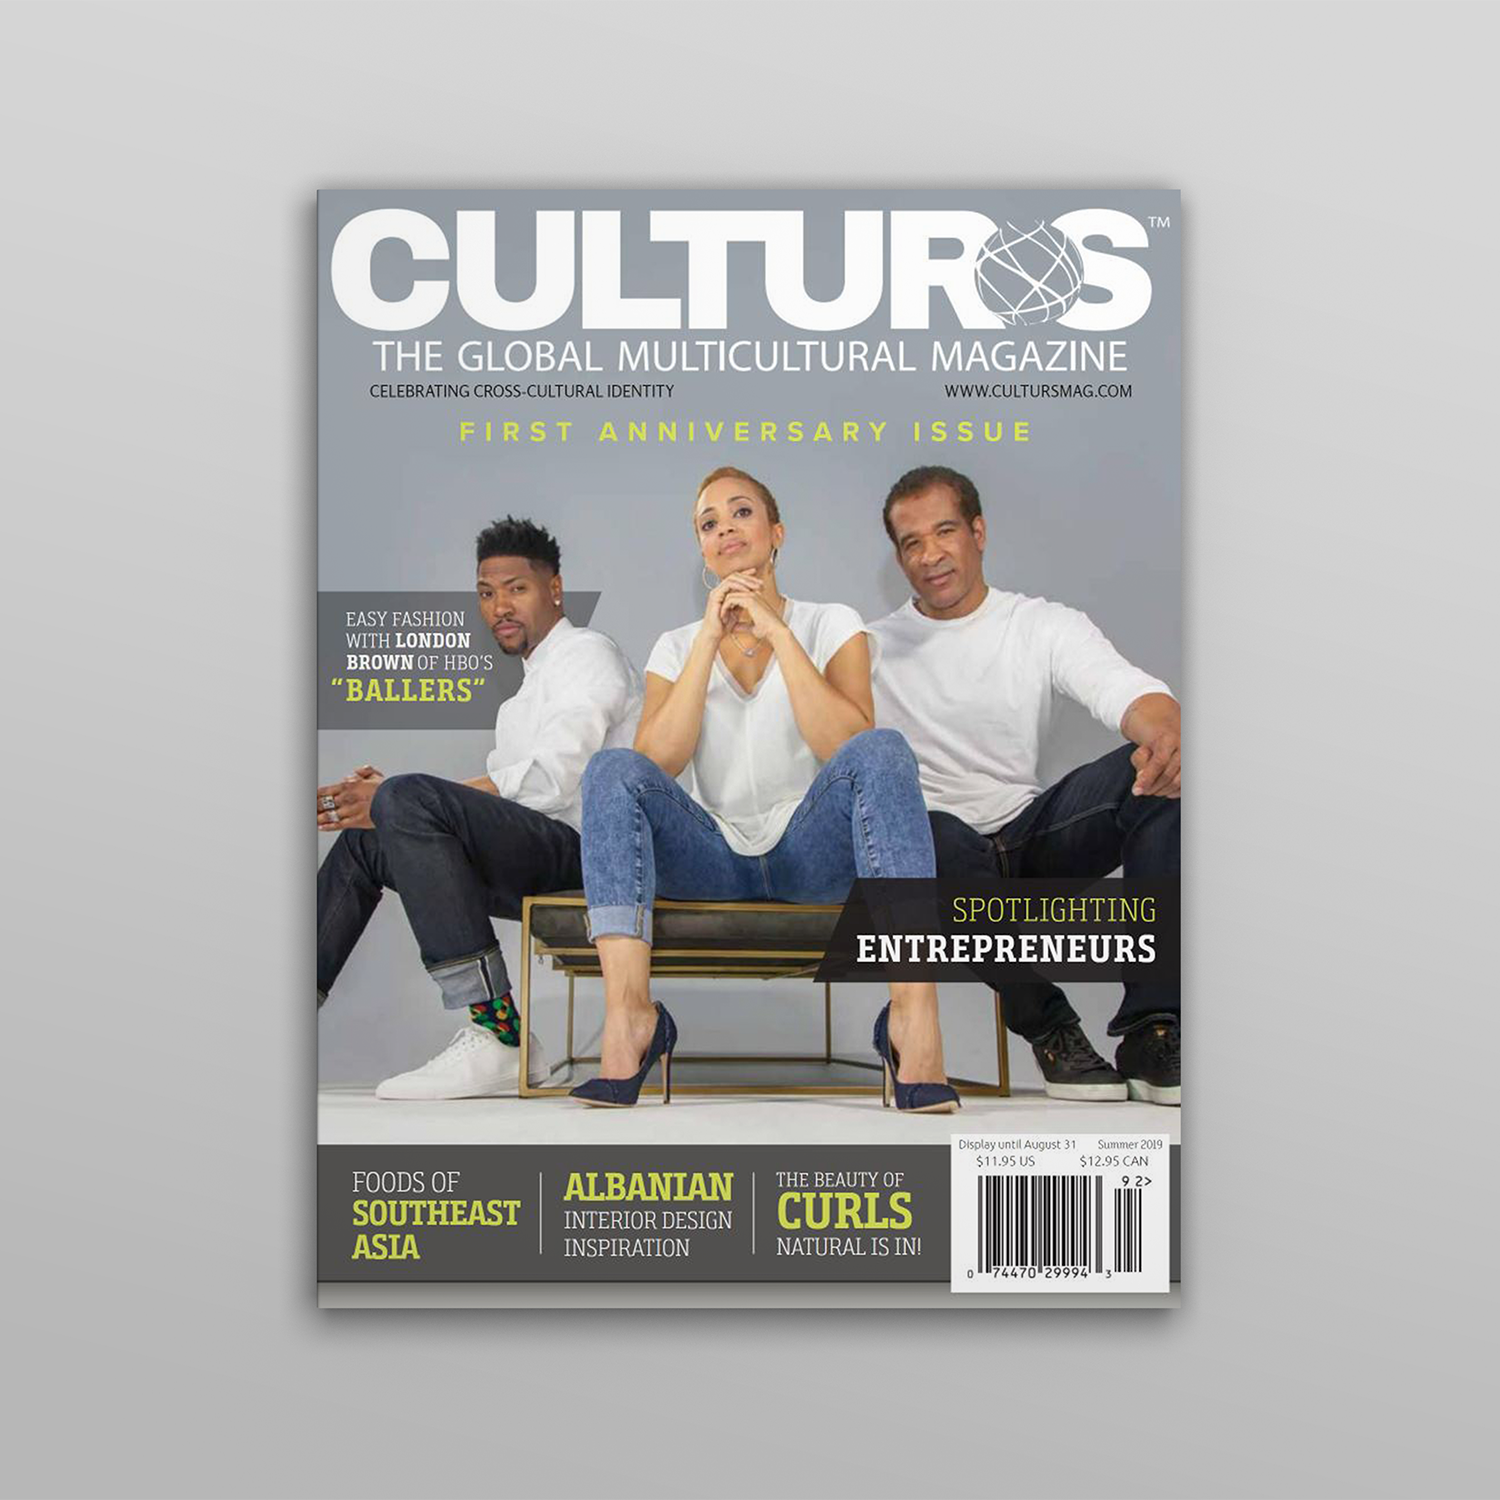 Entrepreneurs Issue featuring London Brown of HBO's Ballers, Dorian Gregory and Nichole Cruz